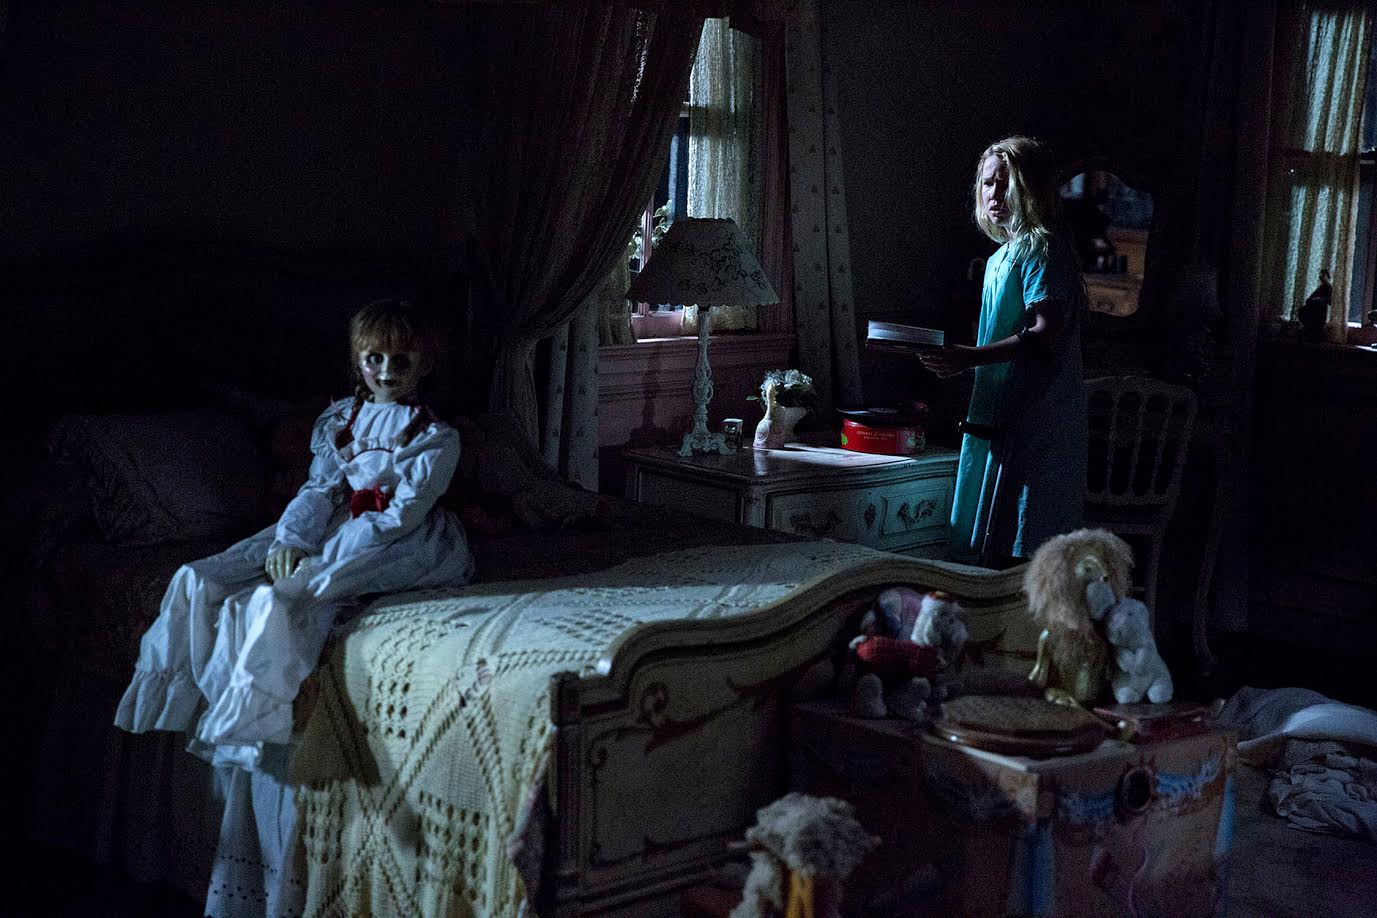  The Annabelle doll and TALITHA BATEMAN as Janice in New Line Cinema&rsquo;s supernatural thriller Annabelle 2, a Warner Bros. Pictures release. 